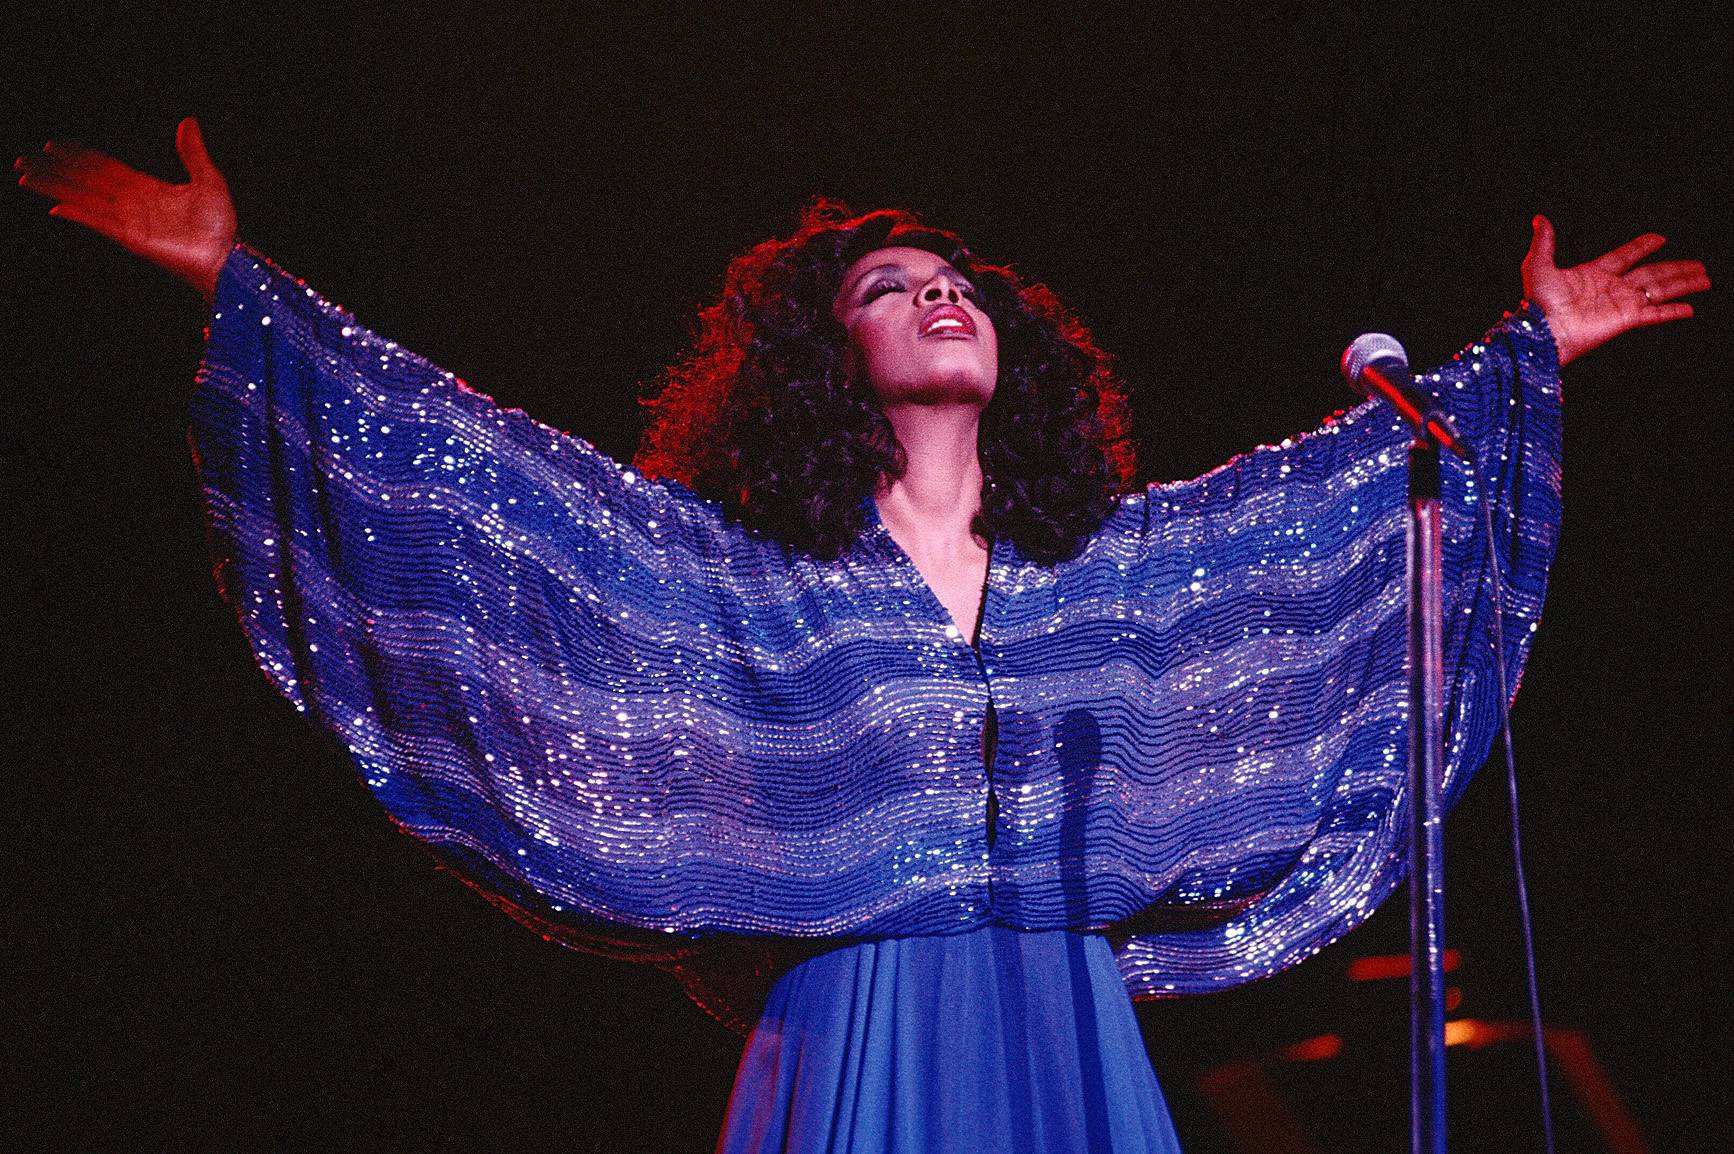 Blue Majesty - On stage, Summer was a sight to behold as she was back in 1979 in this shimmering blue dress.  (Photo: Michael Ochs Archives/Getty Images)